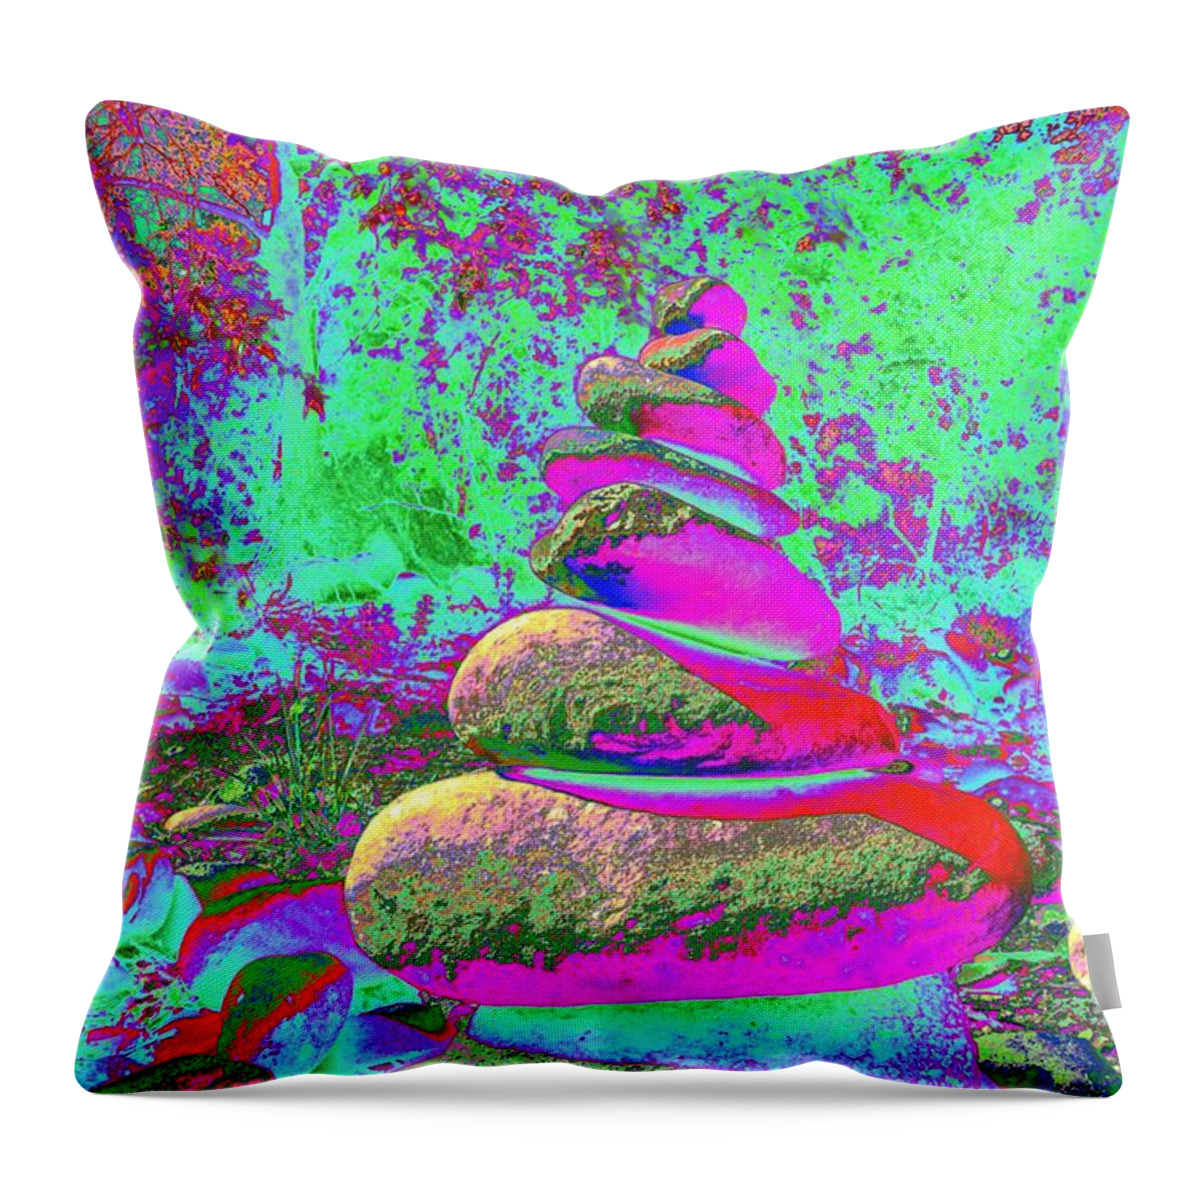 Cairn Throw Pillow featuring the photograph Colorful Cairn by Richard Henne